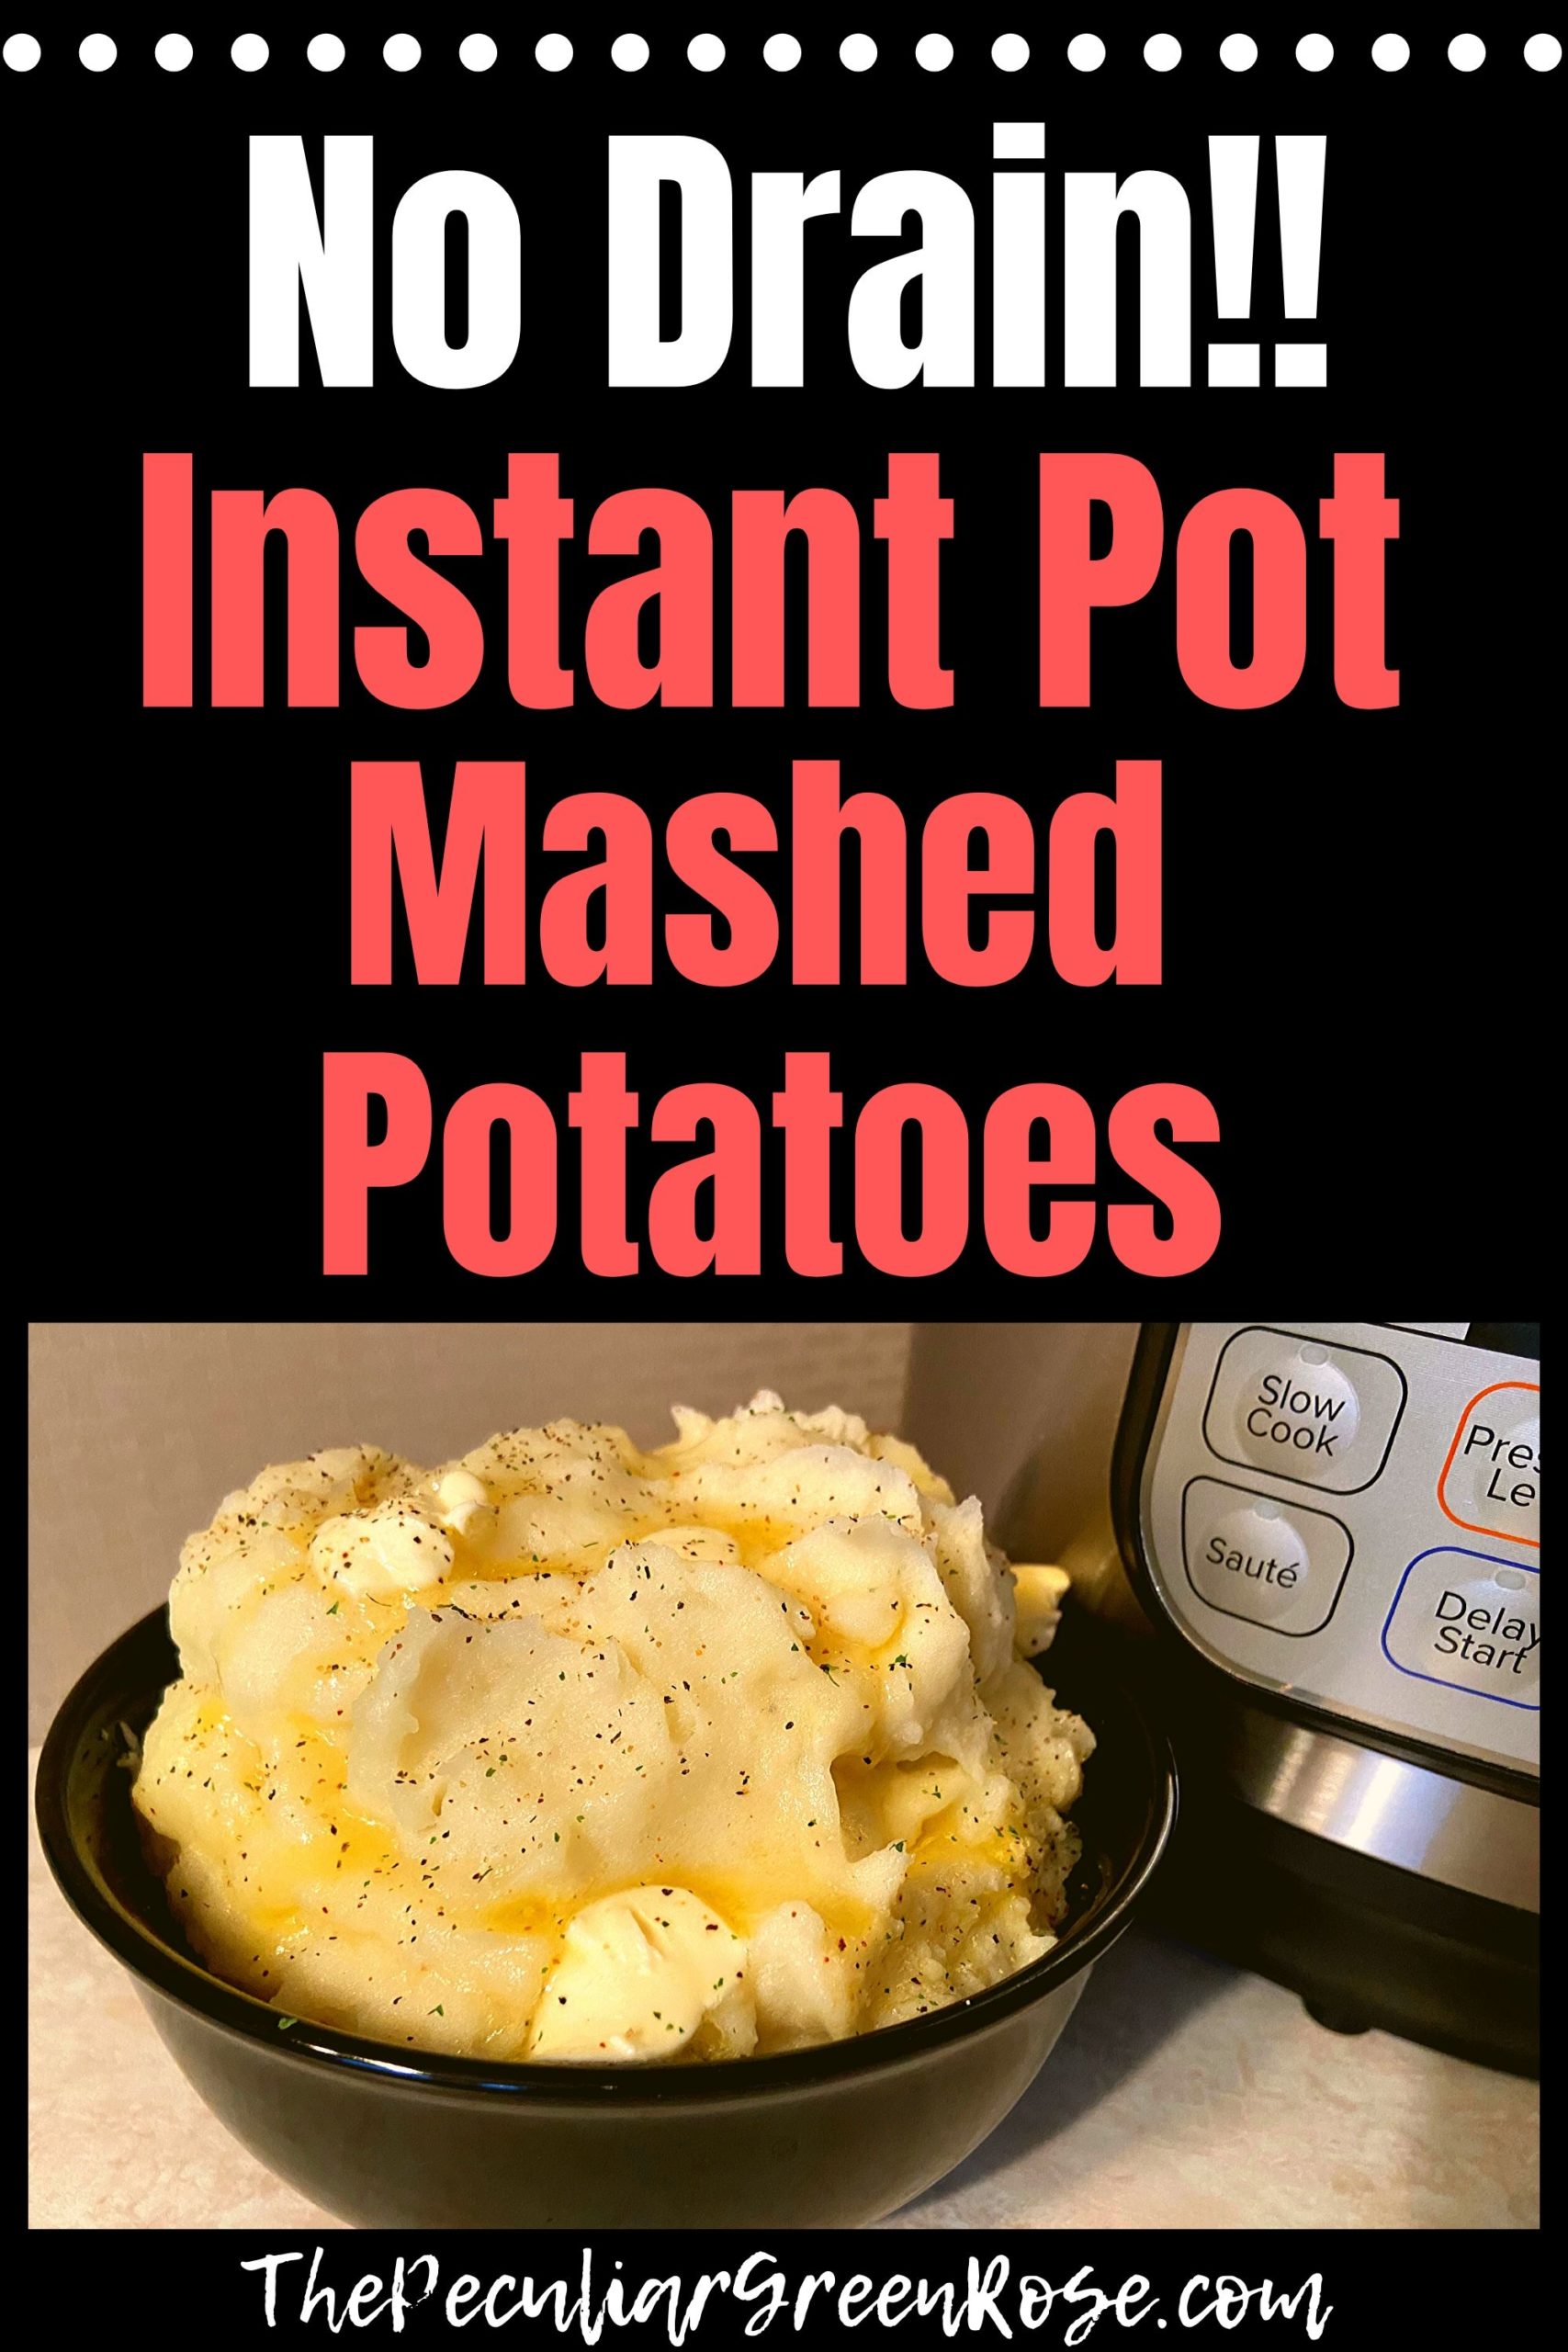 A black bowl filled with mashed potatoes topped with butter and seasoning on a kitchen counter in front of an Instant Pot.